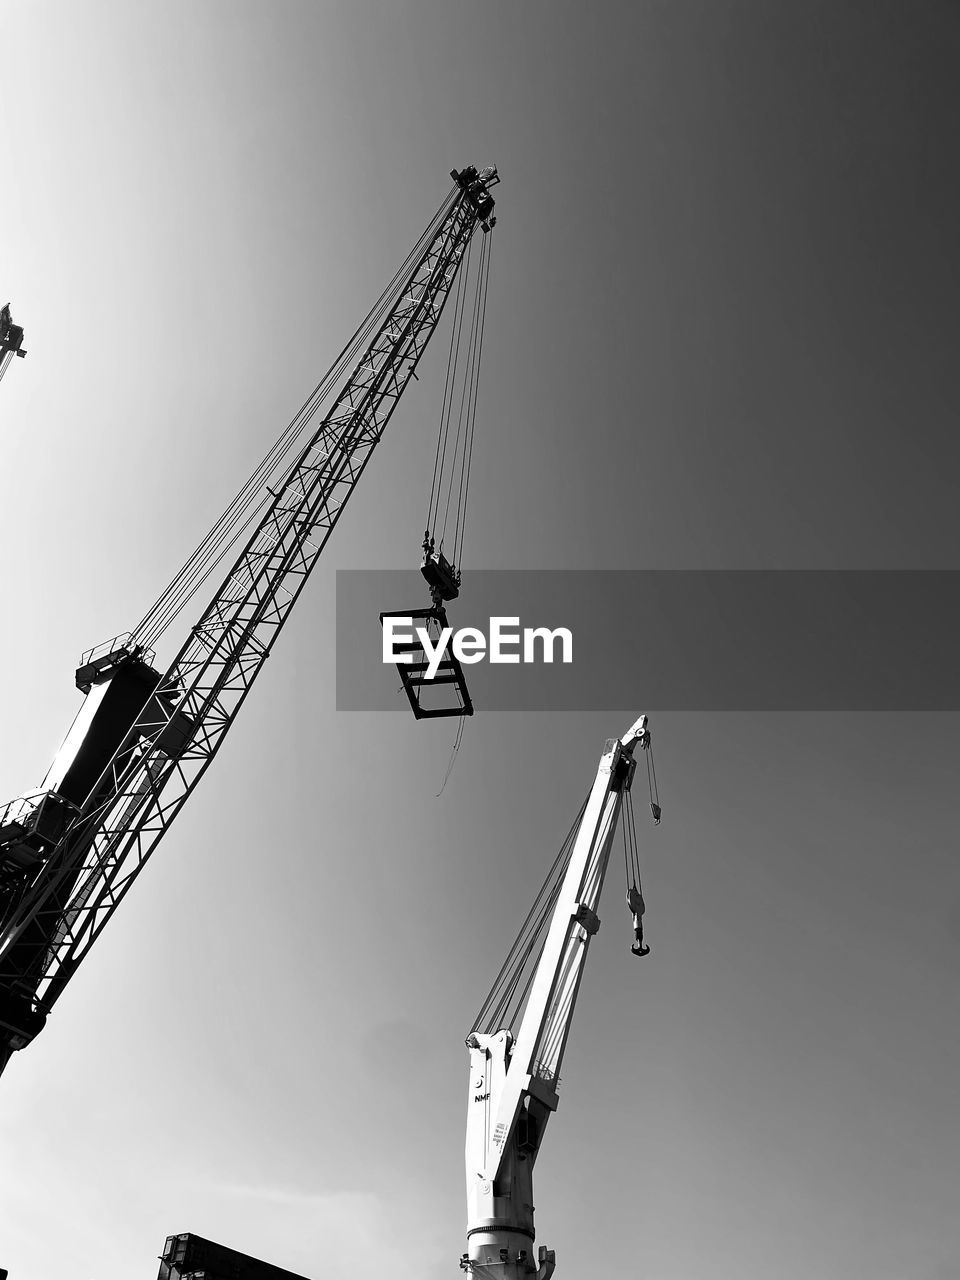 crane - construction machinery, machinery, industry, sky, construction industry, construction site, construction machinery, line, architecture, black and white, low angle view, development, nature, no people, monochrome photography, vehicle, unloading, clear sky, monochrome, business finance and industry, built structure, transportation, outdoors, business, copy space, day, construction equipment